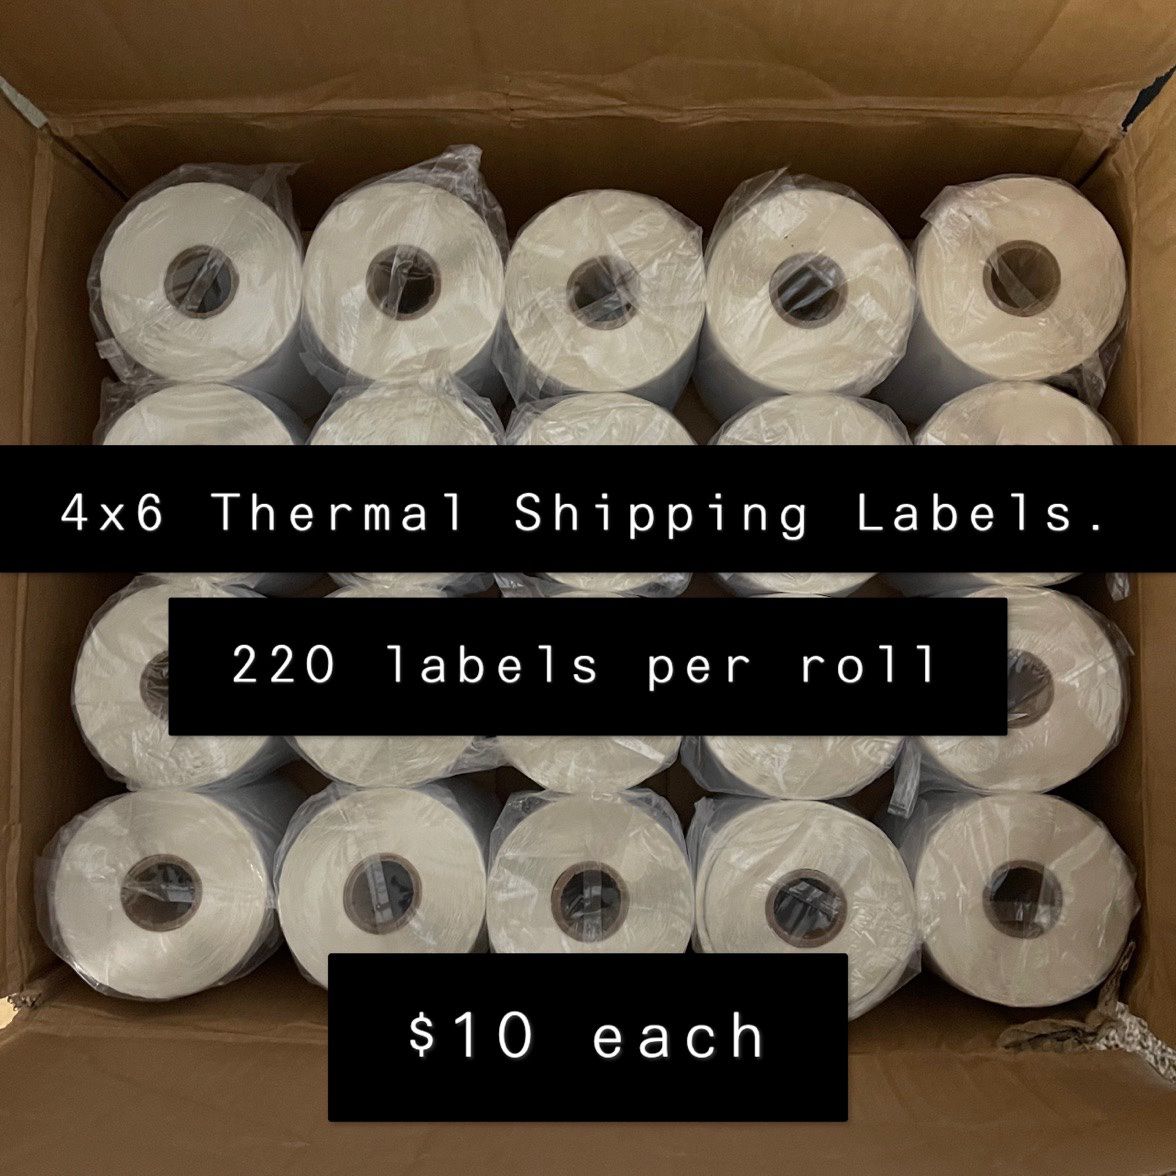 4x6 Thermal Shipping Labels/Rolls - 220 Labels Per Roll